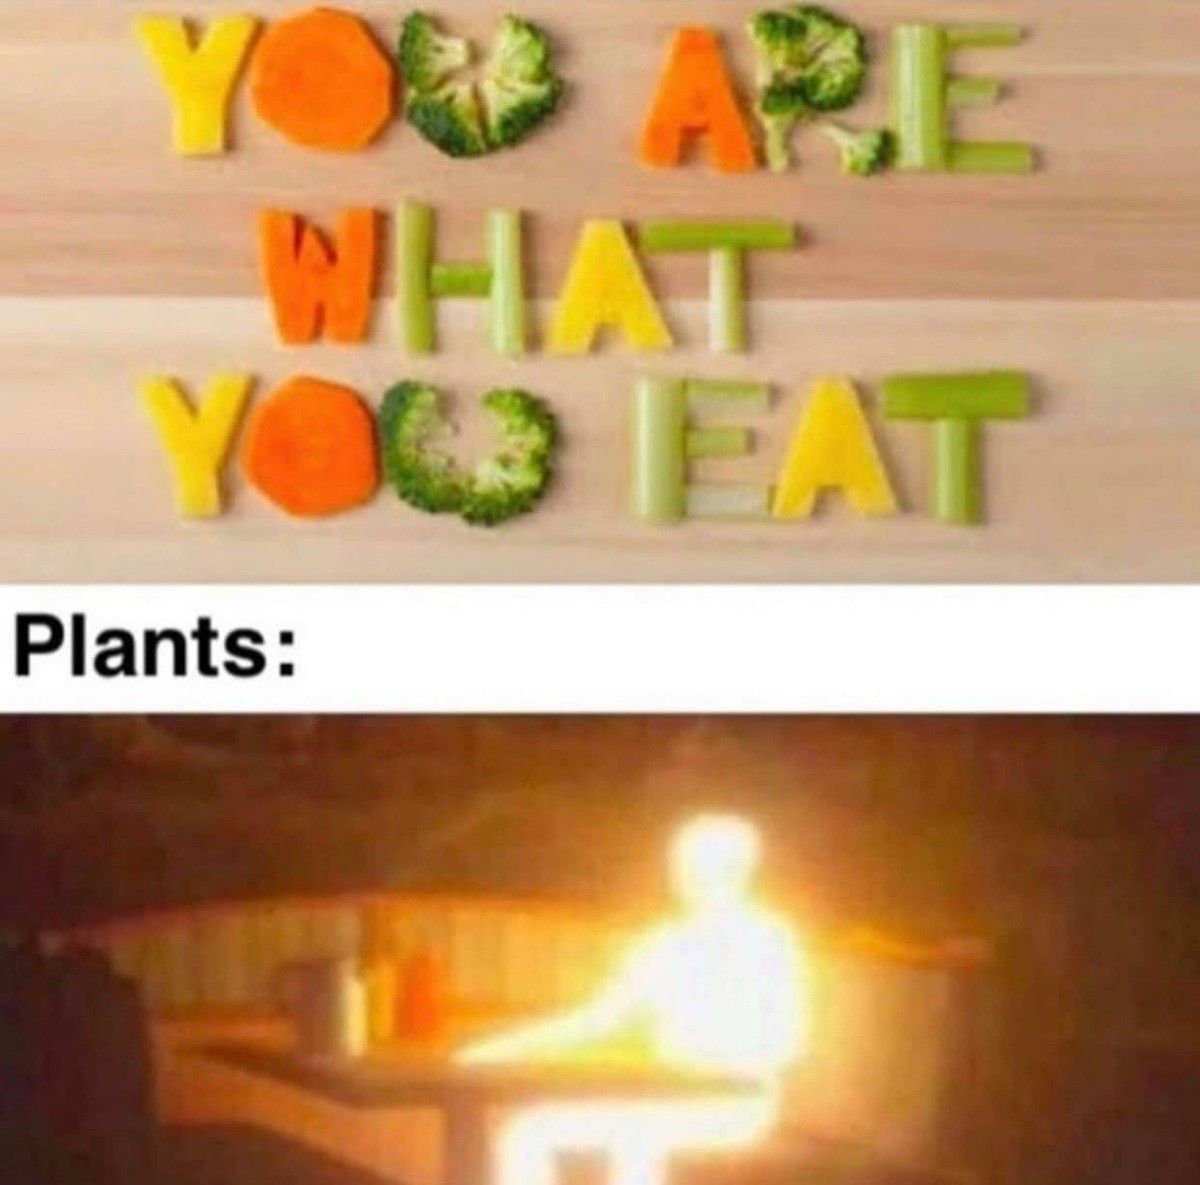 Must be why vegans think they're so bright